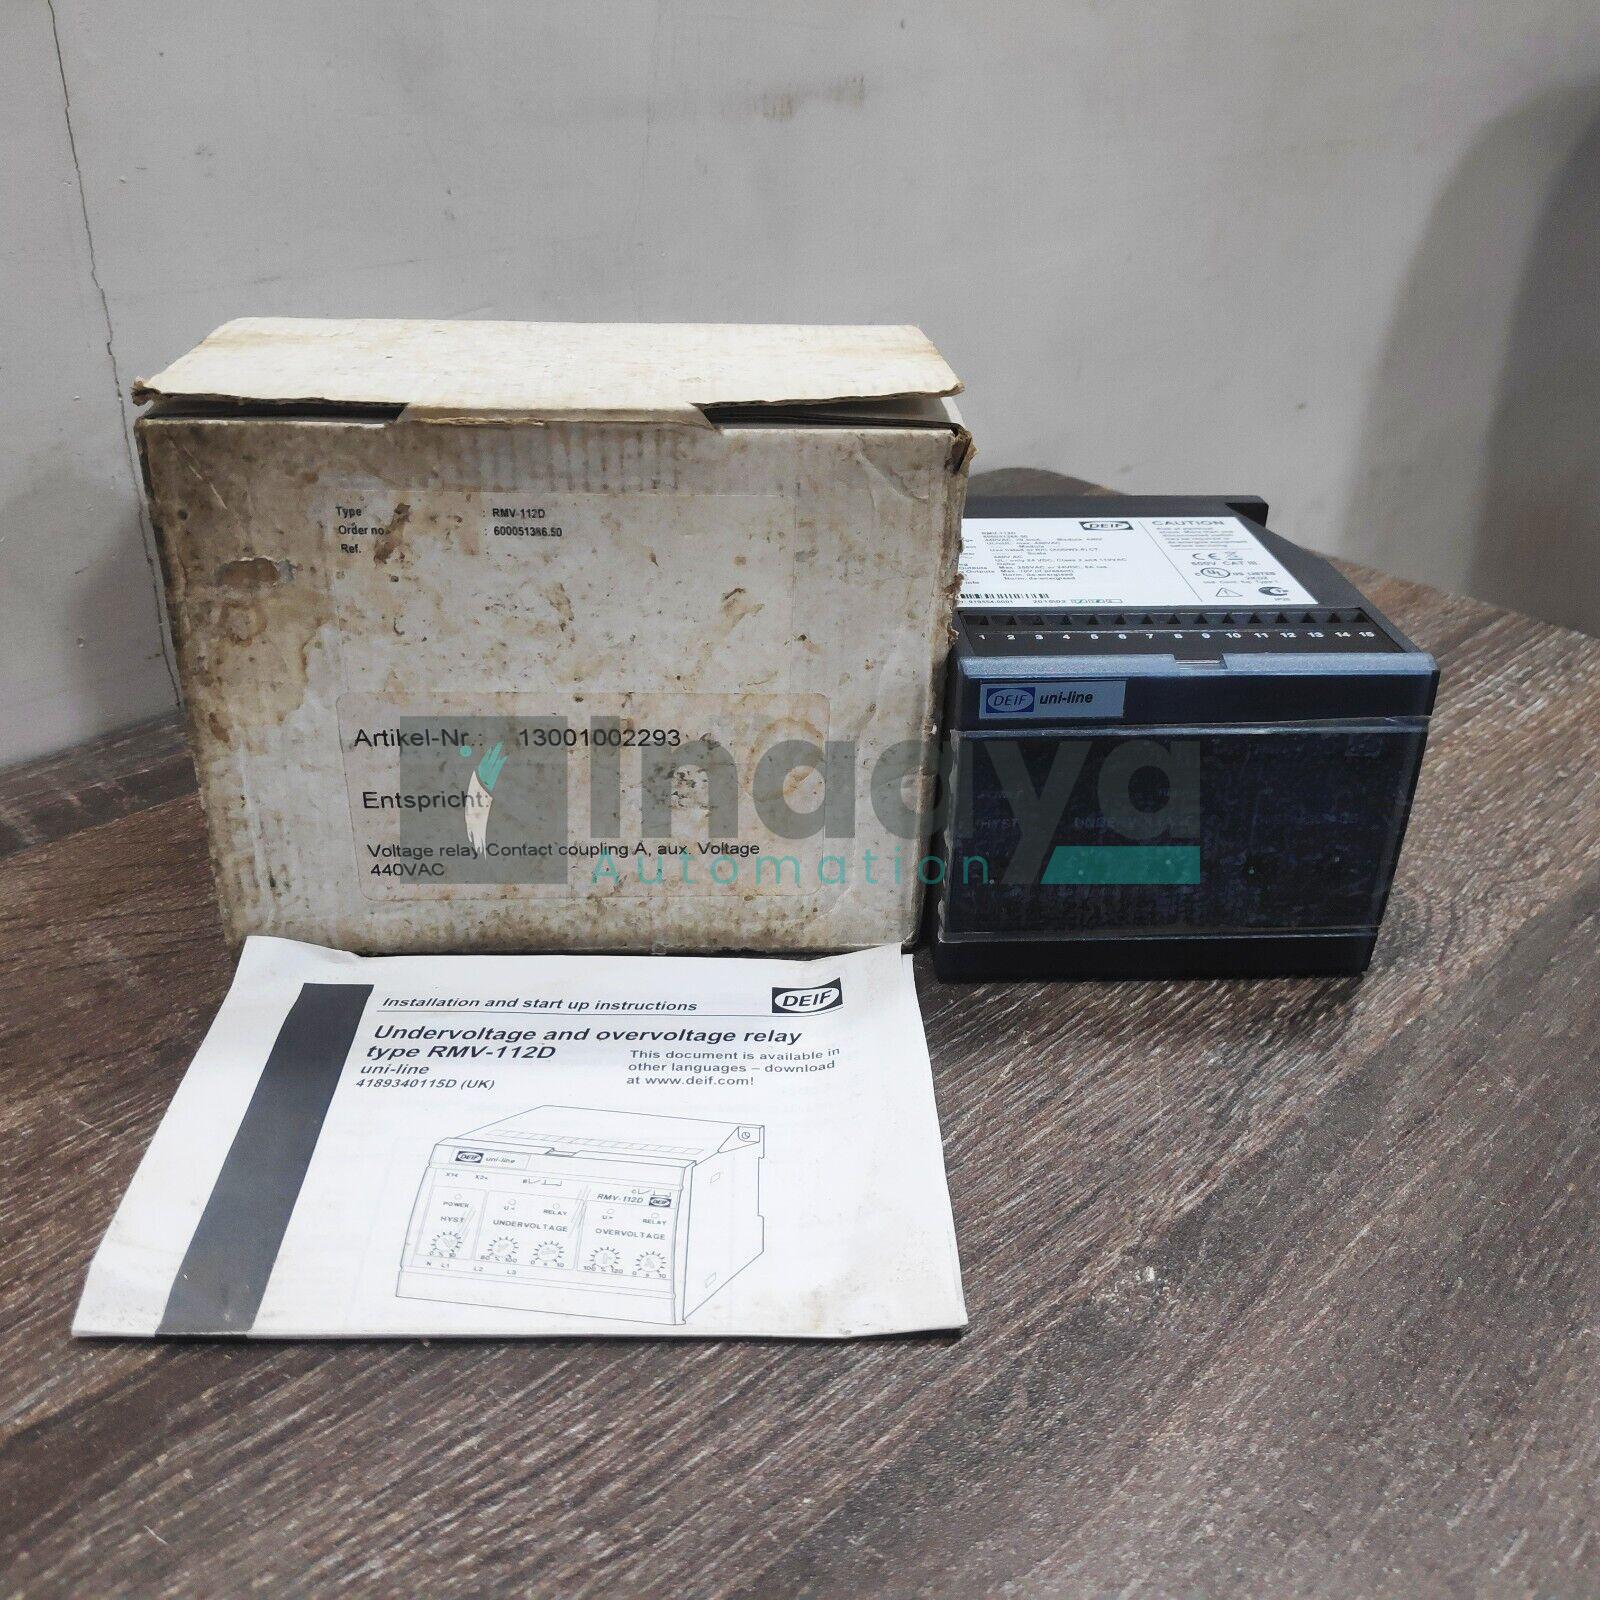 DEIF RMV-112D DELTA-440VAC-ND+ND-440VAC PROTECTIVE VOLTAGE RELAY COUPLING: DELTA MEASURING VOLTAGE 440/254V MODULE: 440V SUPPLY: 440 VAC RELAY B: NOR. DEENERGIZED RELAY C: NORM. DEENERGIZED